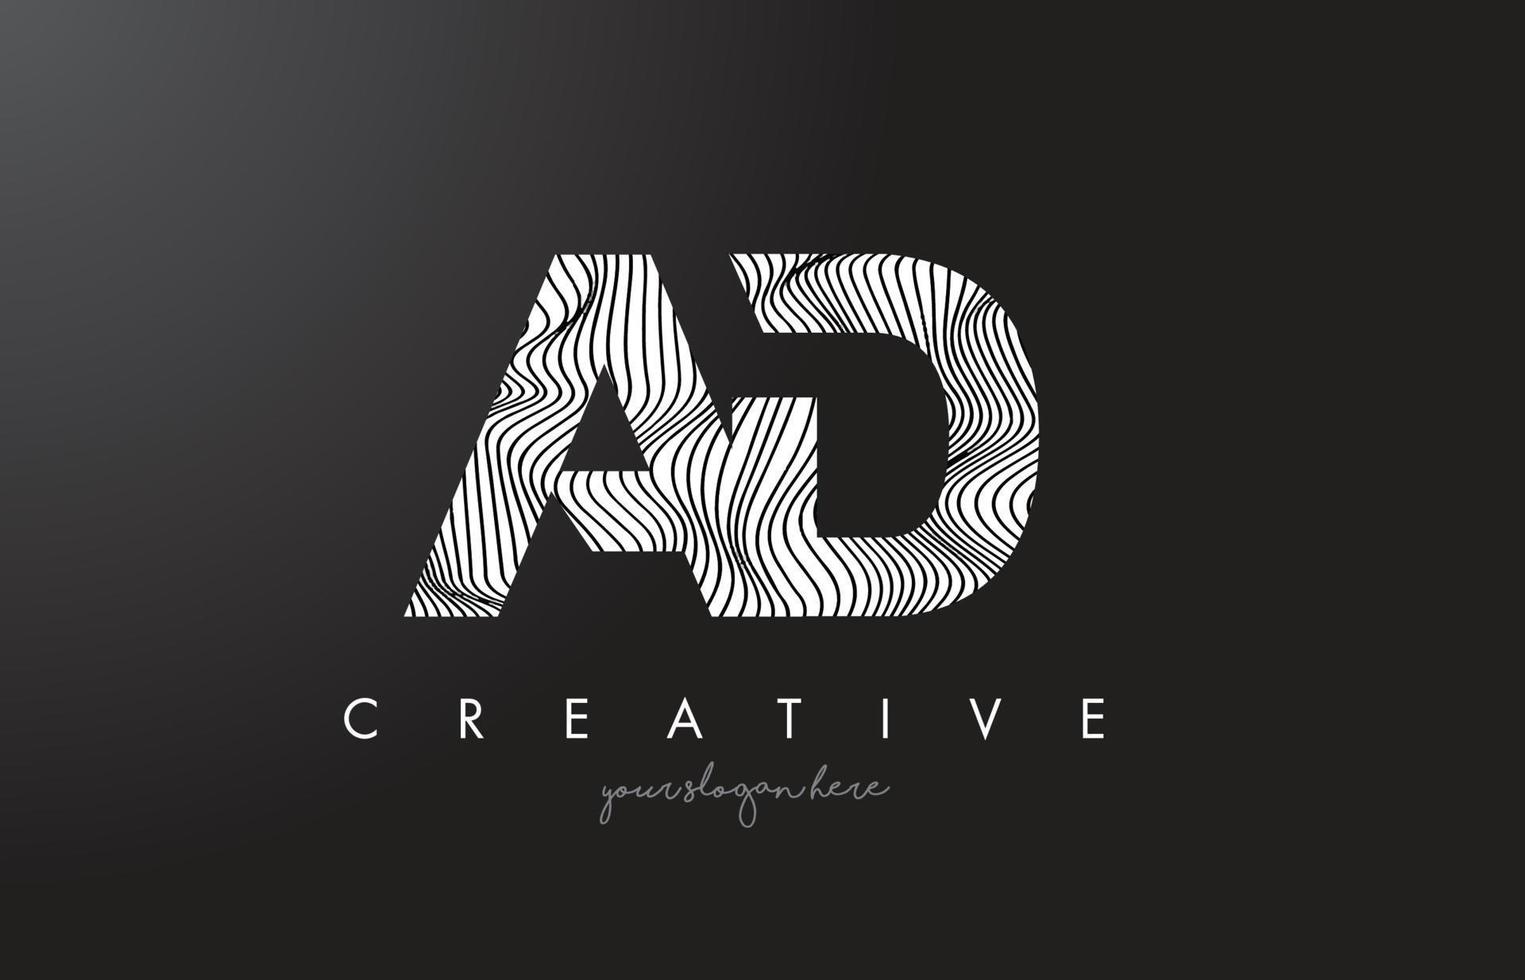 AD A D Letter Logo with Zebra Lines Texture Design Vector. vector